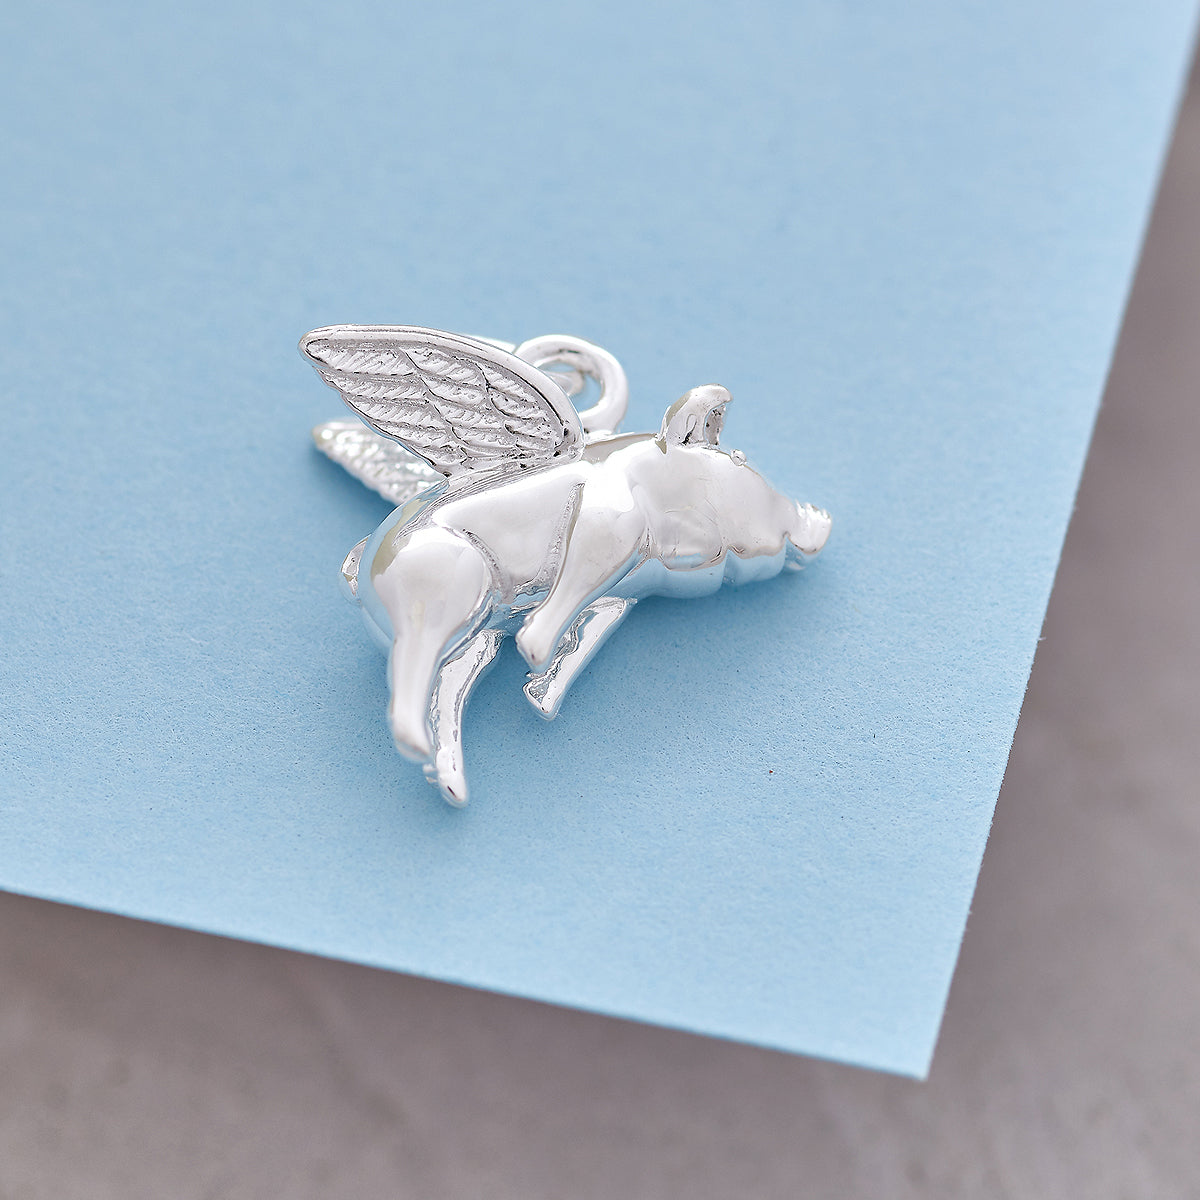 Pigs Might Fly Silver Charm Flying pig bracelet charm